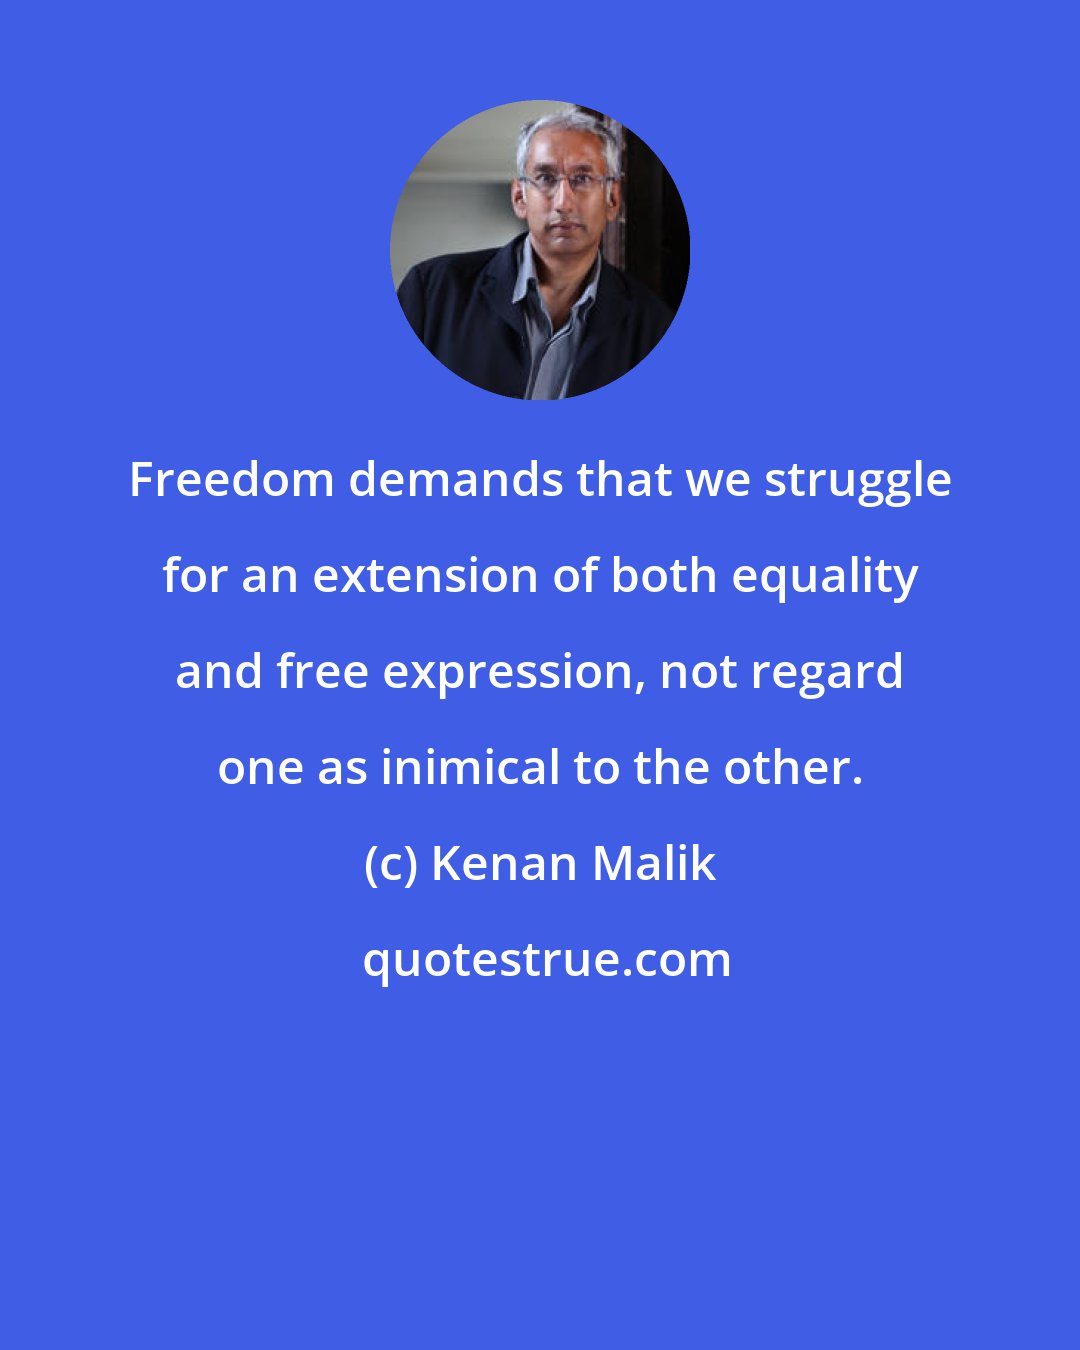 Kenan Malik: Freedom demands that we struggle for an extension of both equality and free expression, not regard one as inimical to the other.